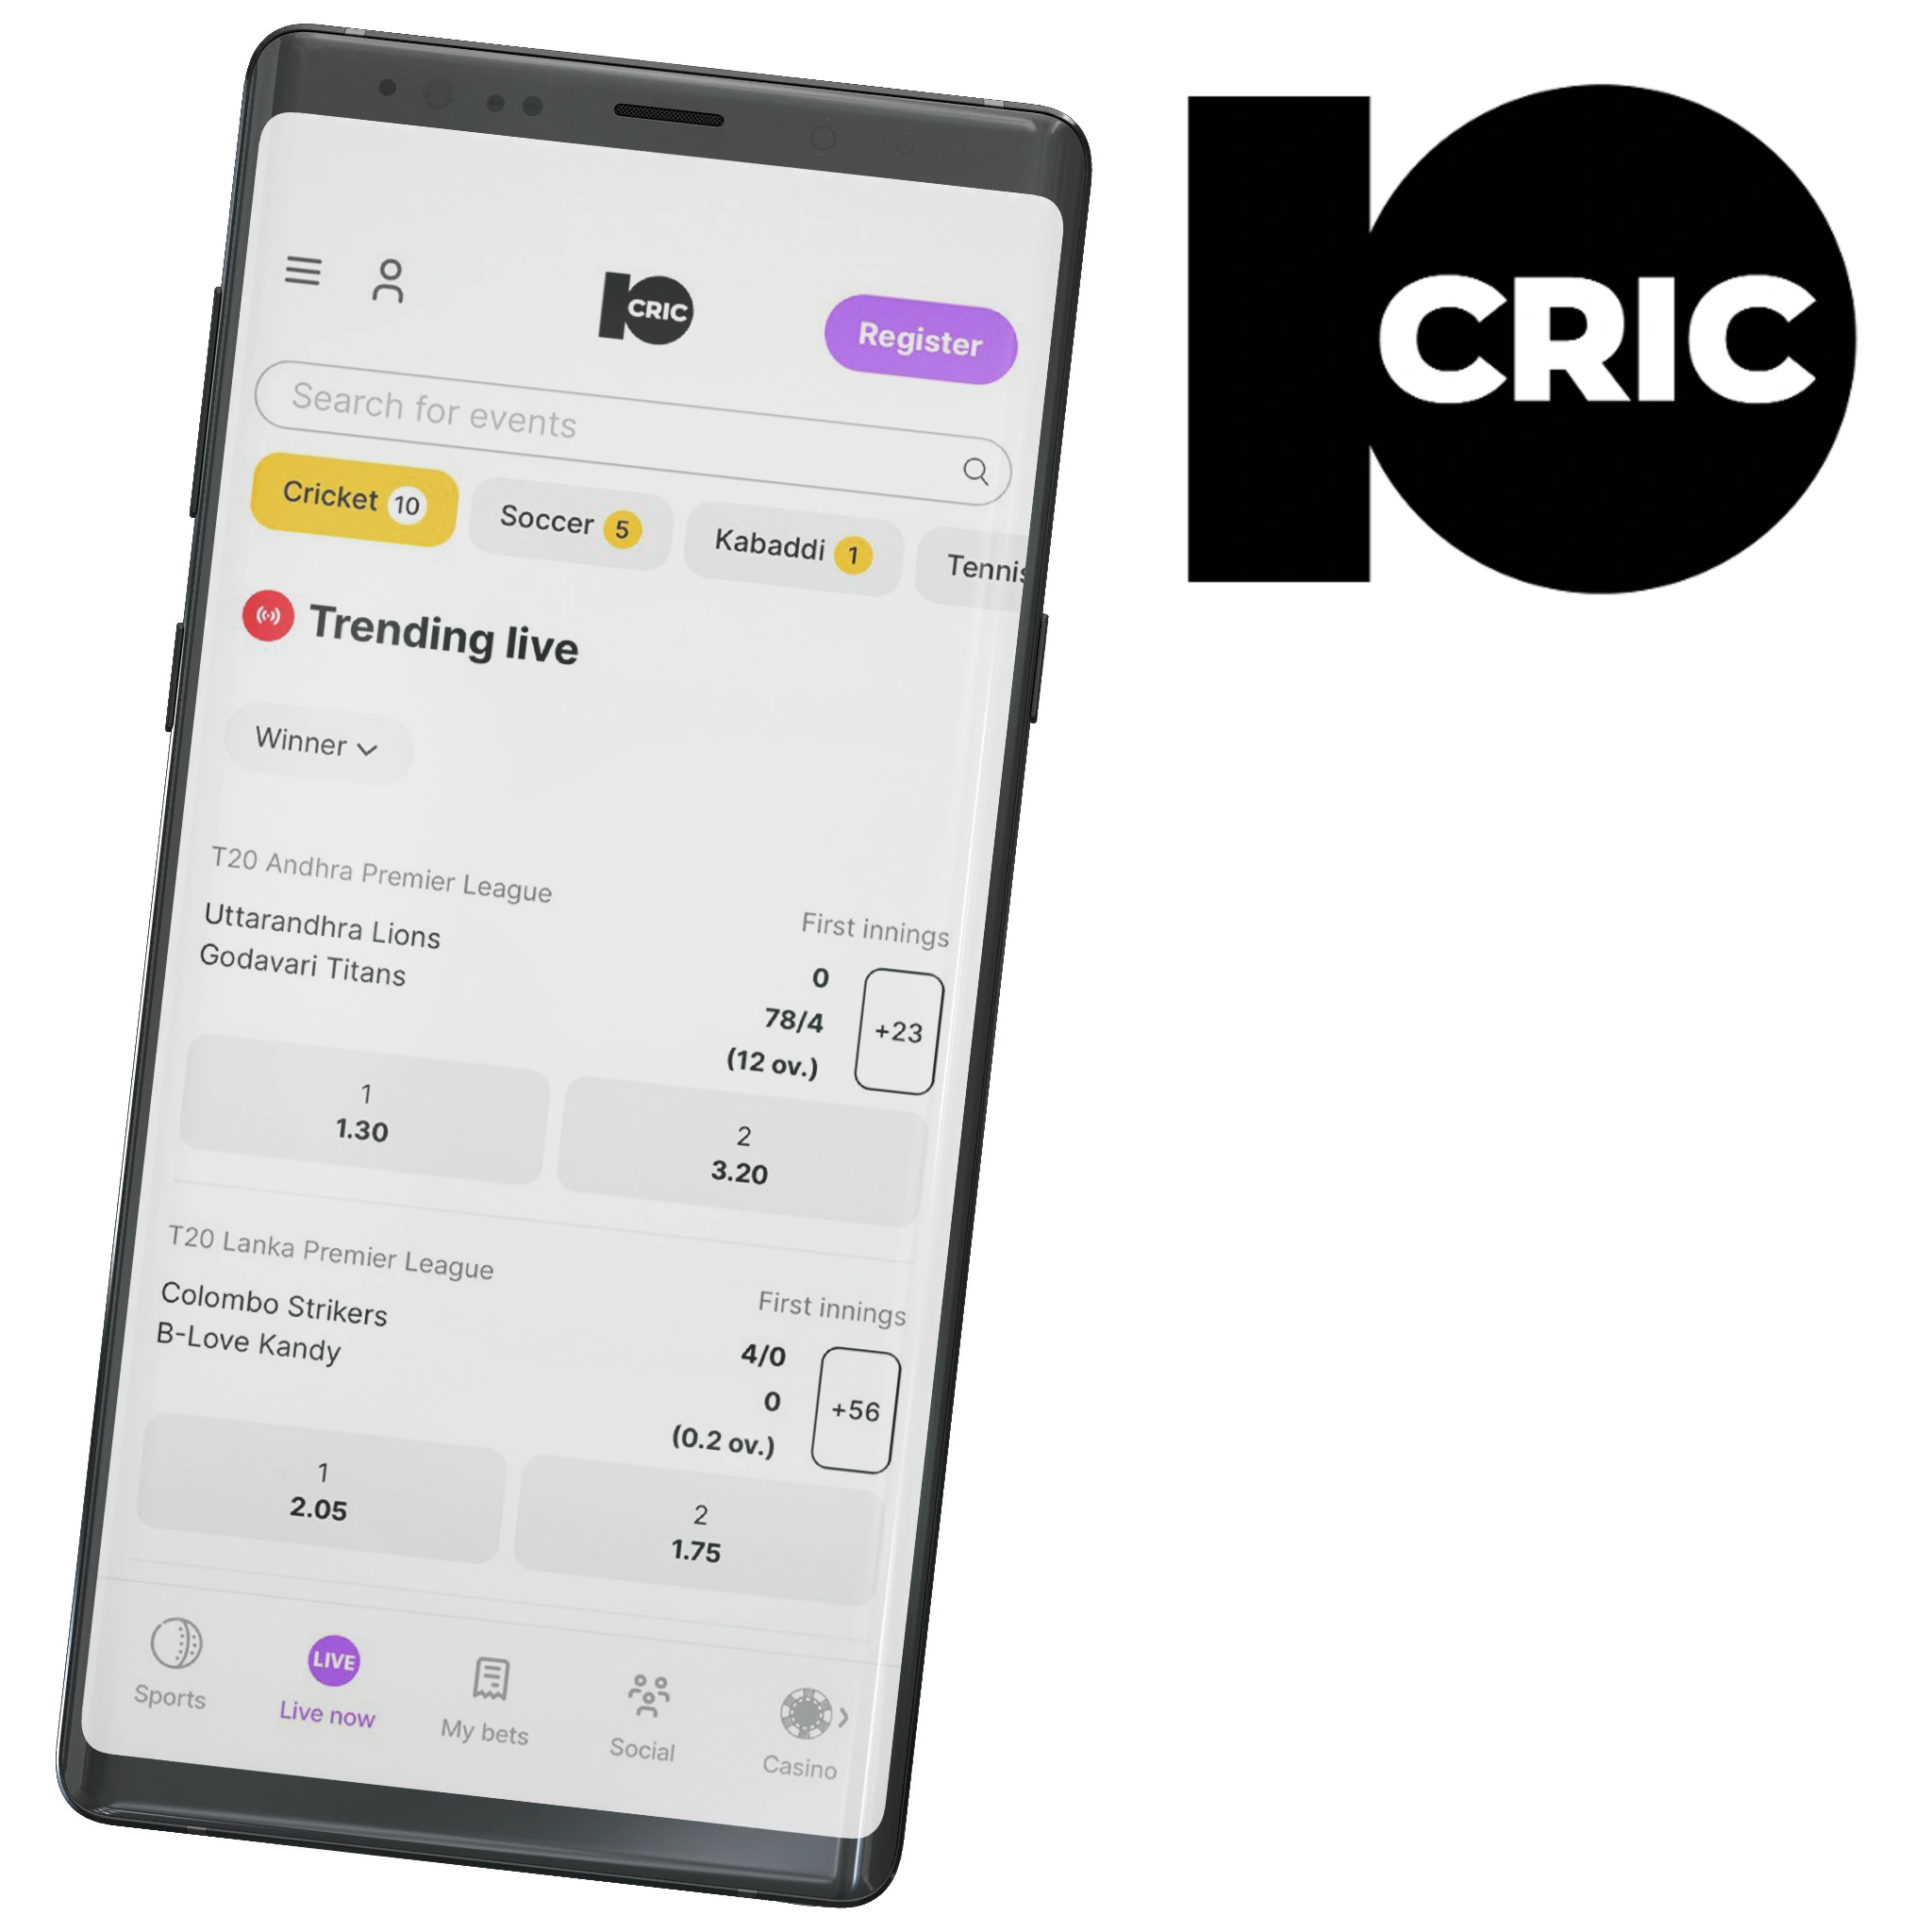 10cric App is for those who care to track cricket betting statistics every day and bet on IPL matches with favorable odds.